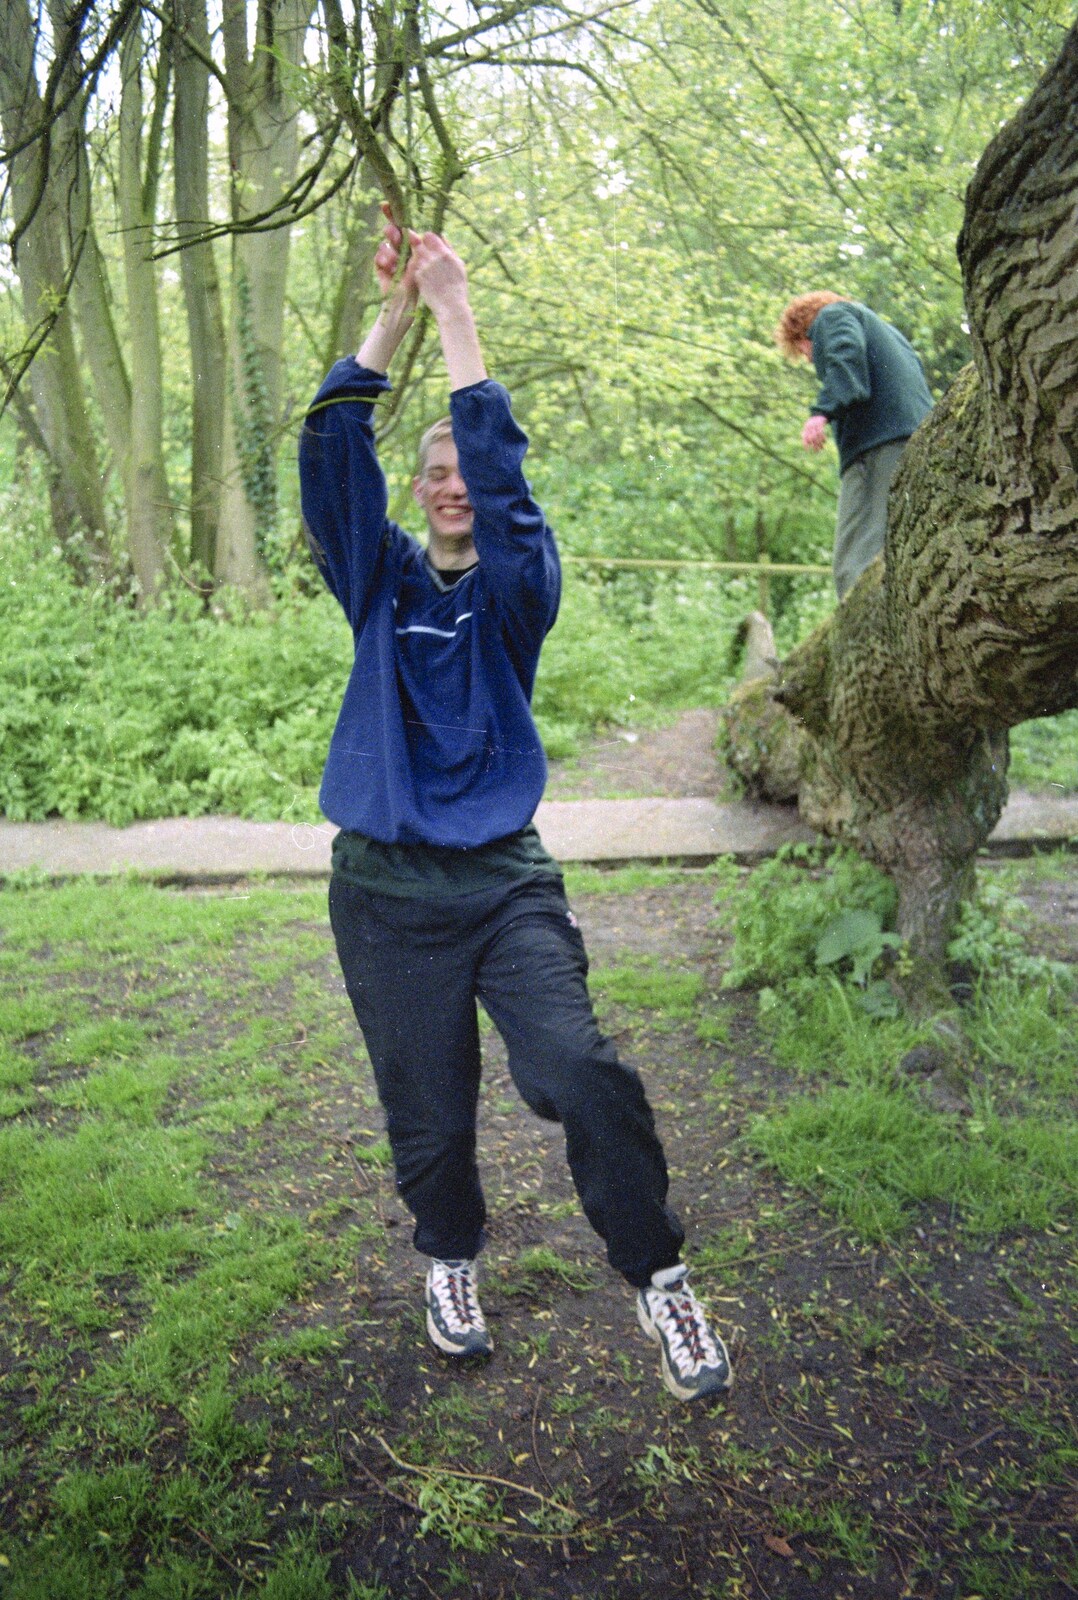 Phil swings around in the trees from A BSCC Bike Ride, Brockdish Greyhound and Hoxne Swan, Suffolk - 4th May 2000